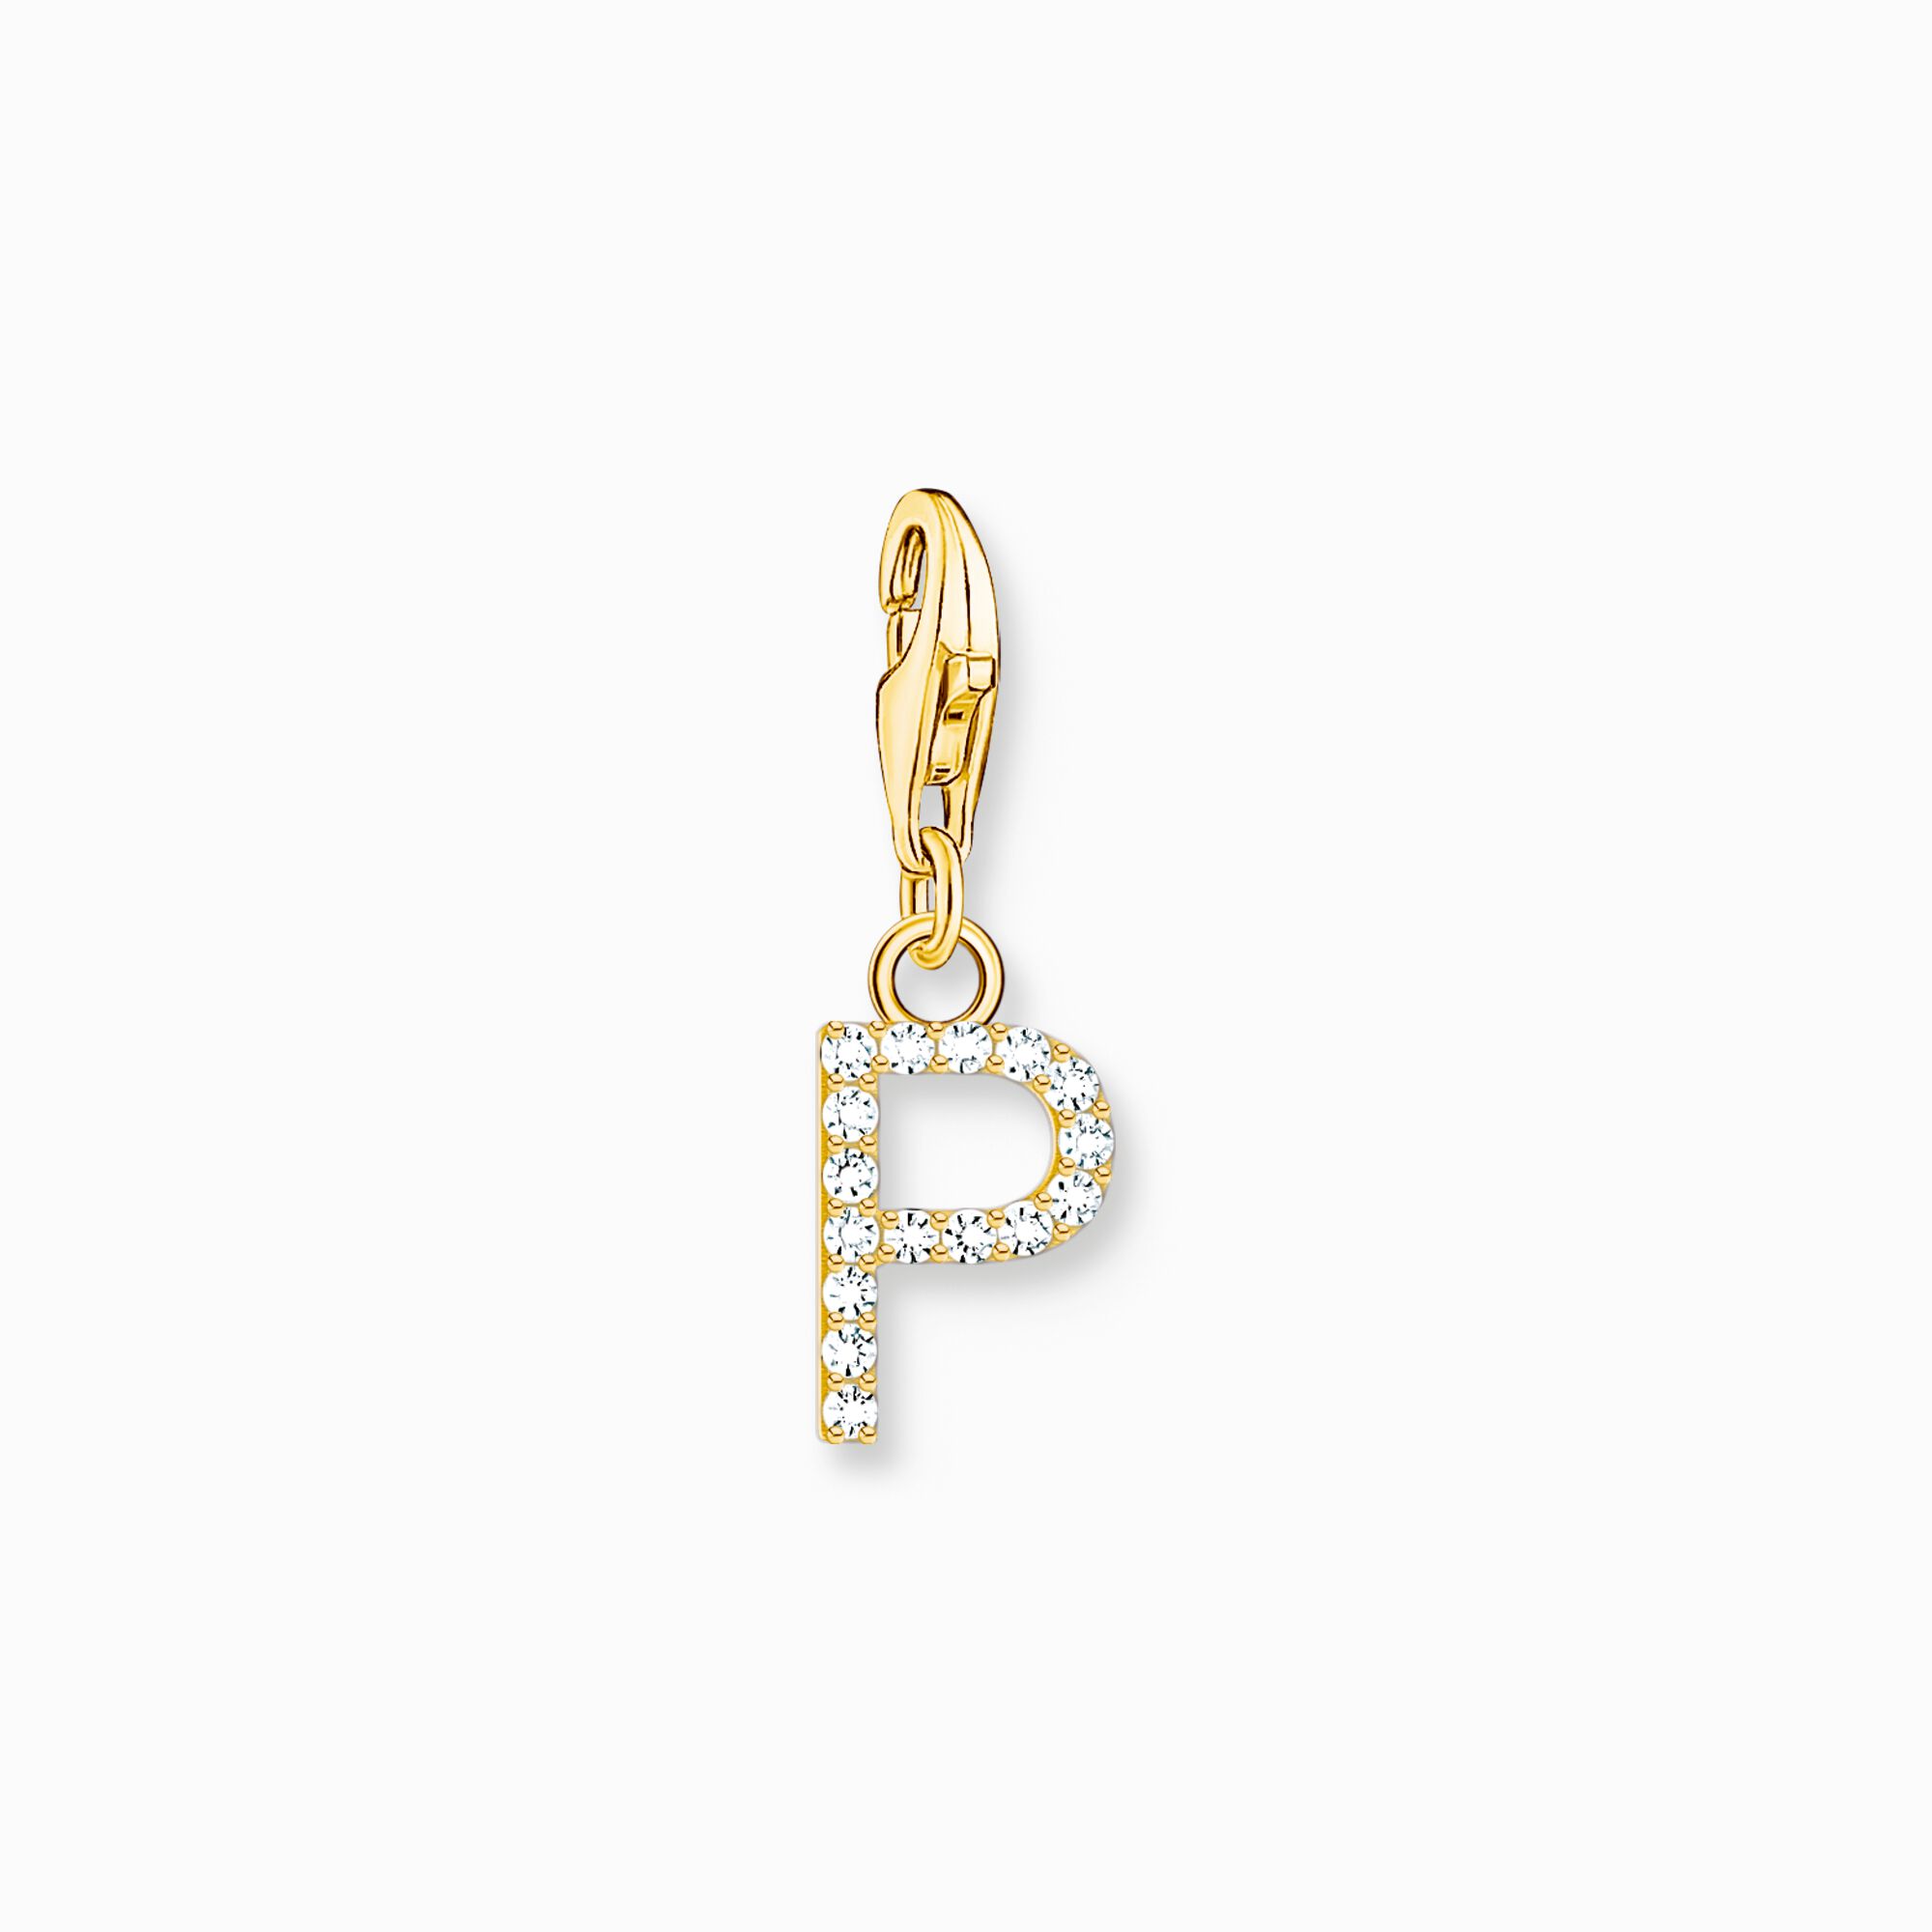 Charm pendant letter P with white stones gold plated from the Charm Club collection in the THOMAS SABO online store